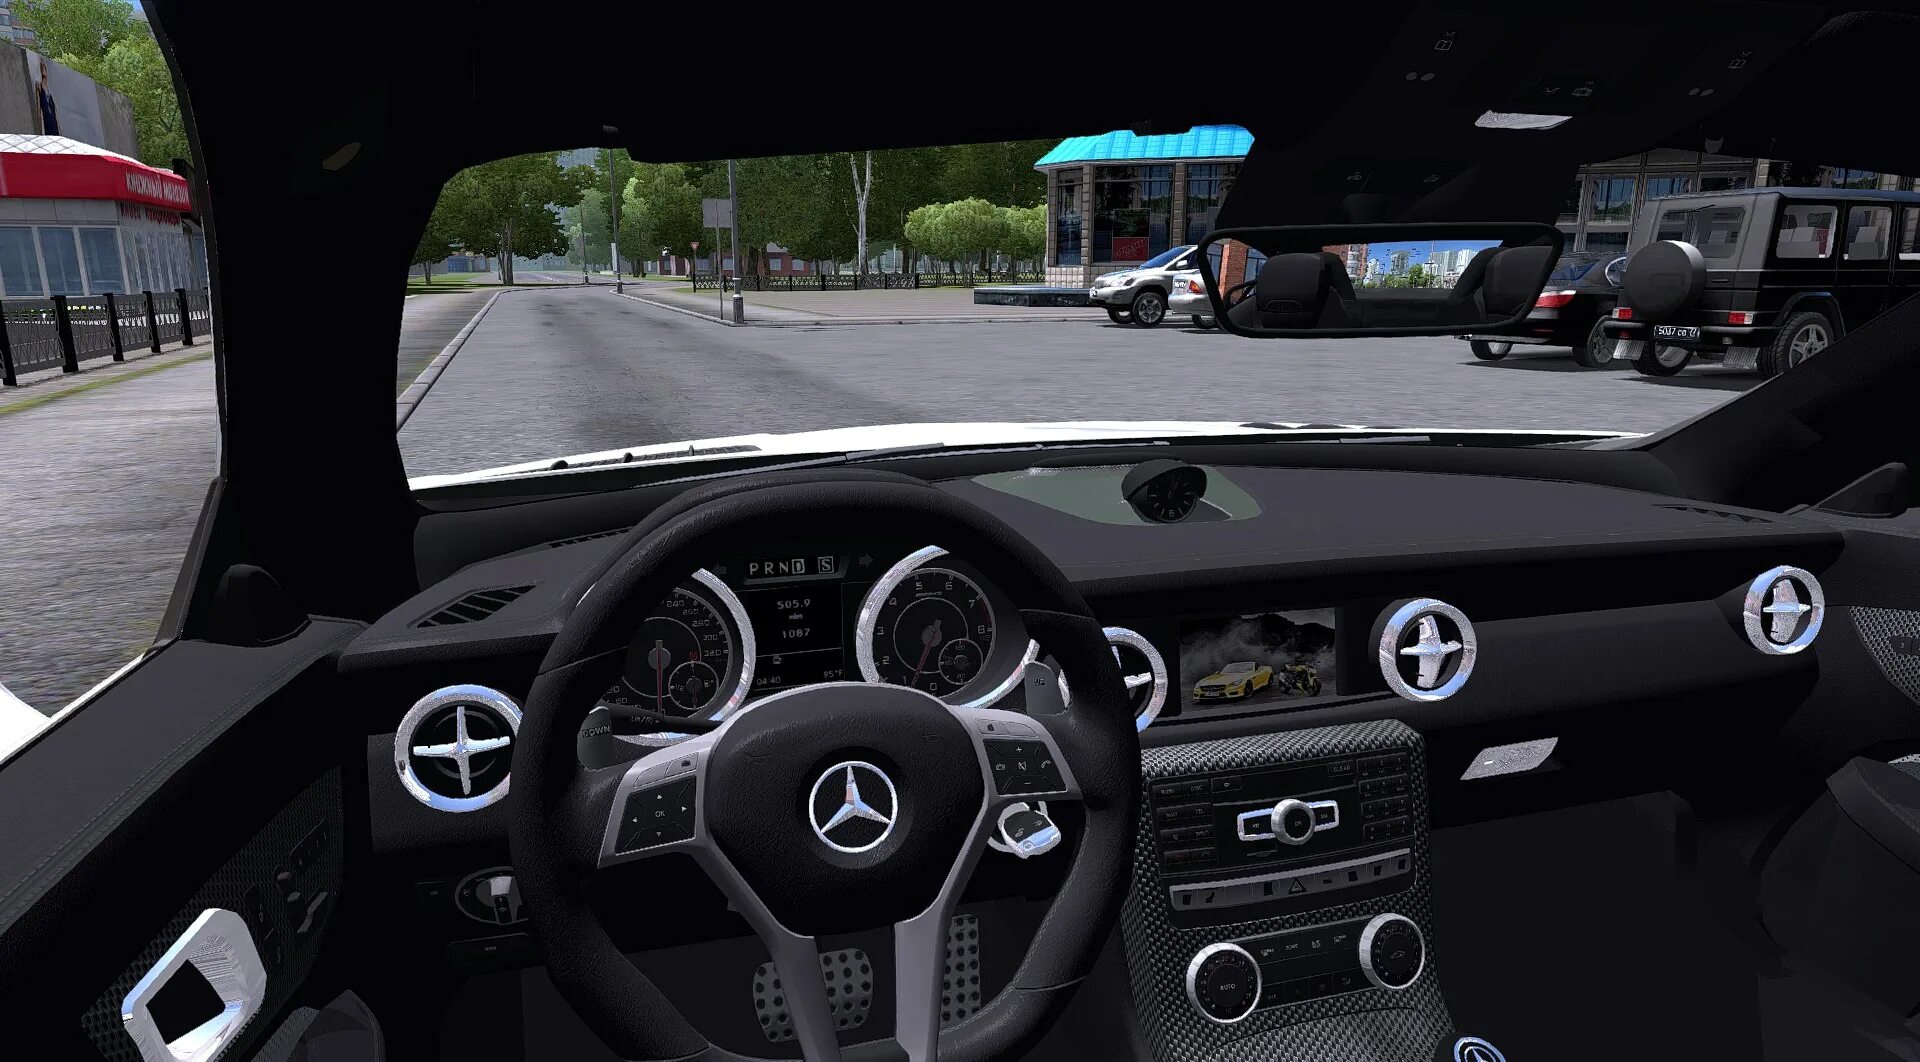 Im playing a game im driving. Мерседес 221 Сити кар драйвинг. Мерседес CLS 63 AMG Сити кар драйвинг. Vthctltcдля Сити кар драйвинг 1.5.9.2. CLS 65 City car Driving.